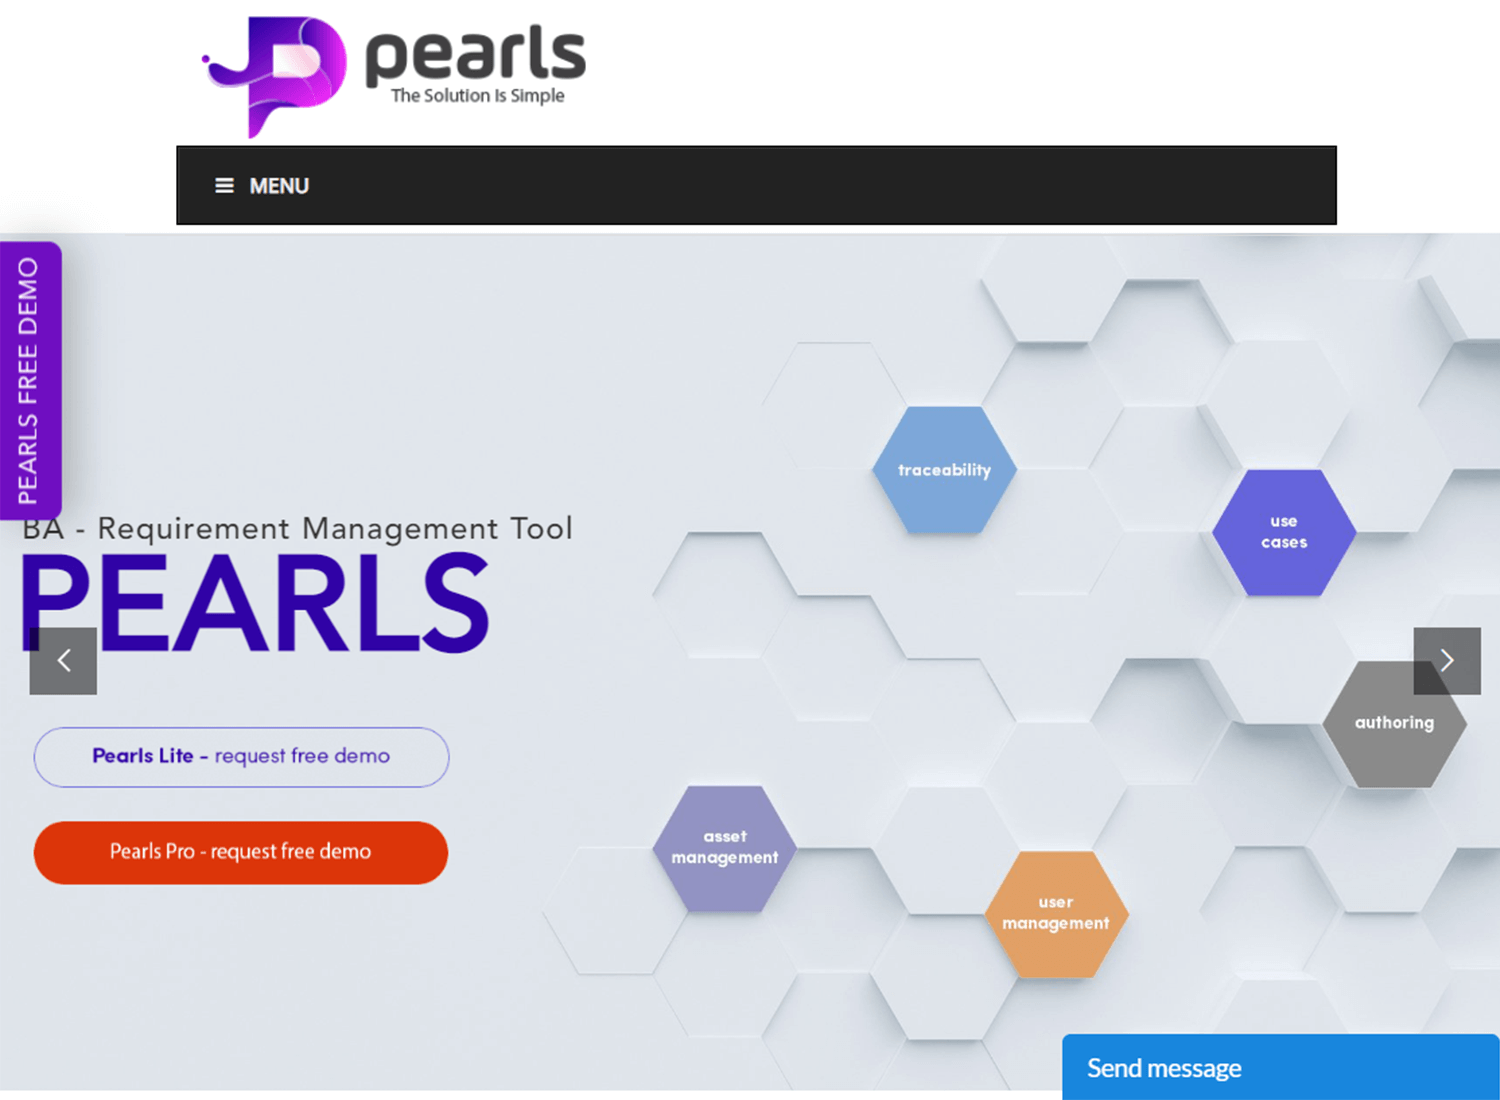 pearls as a requirements management tool for small teams